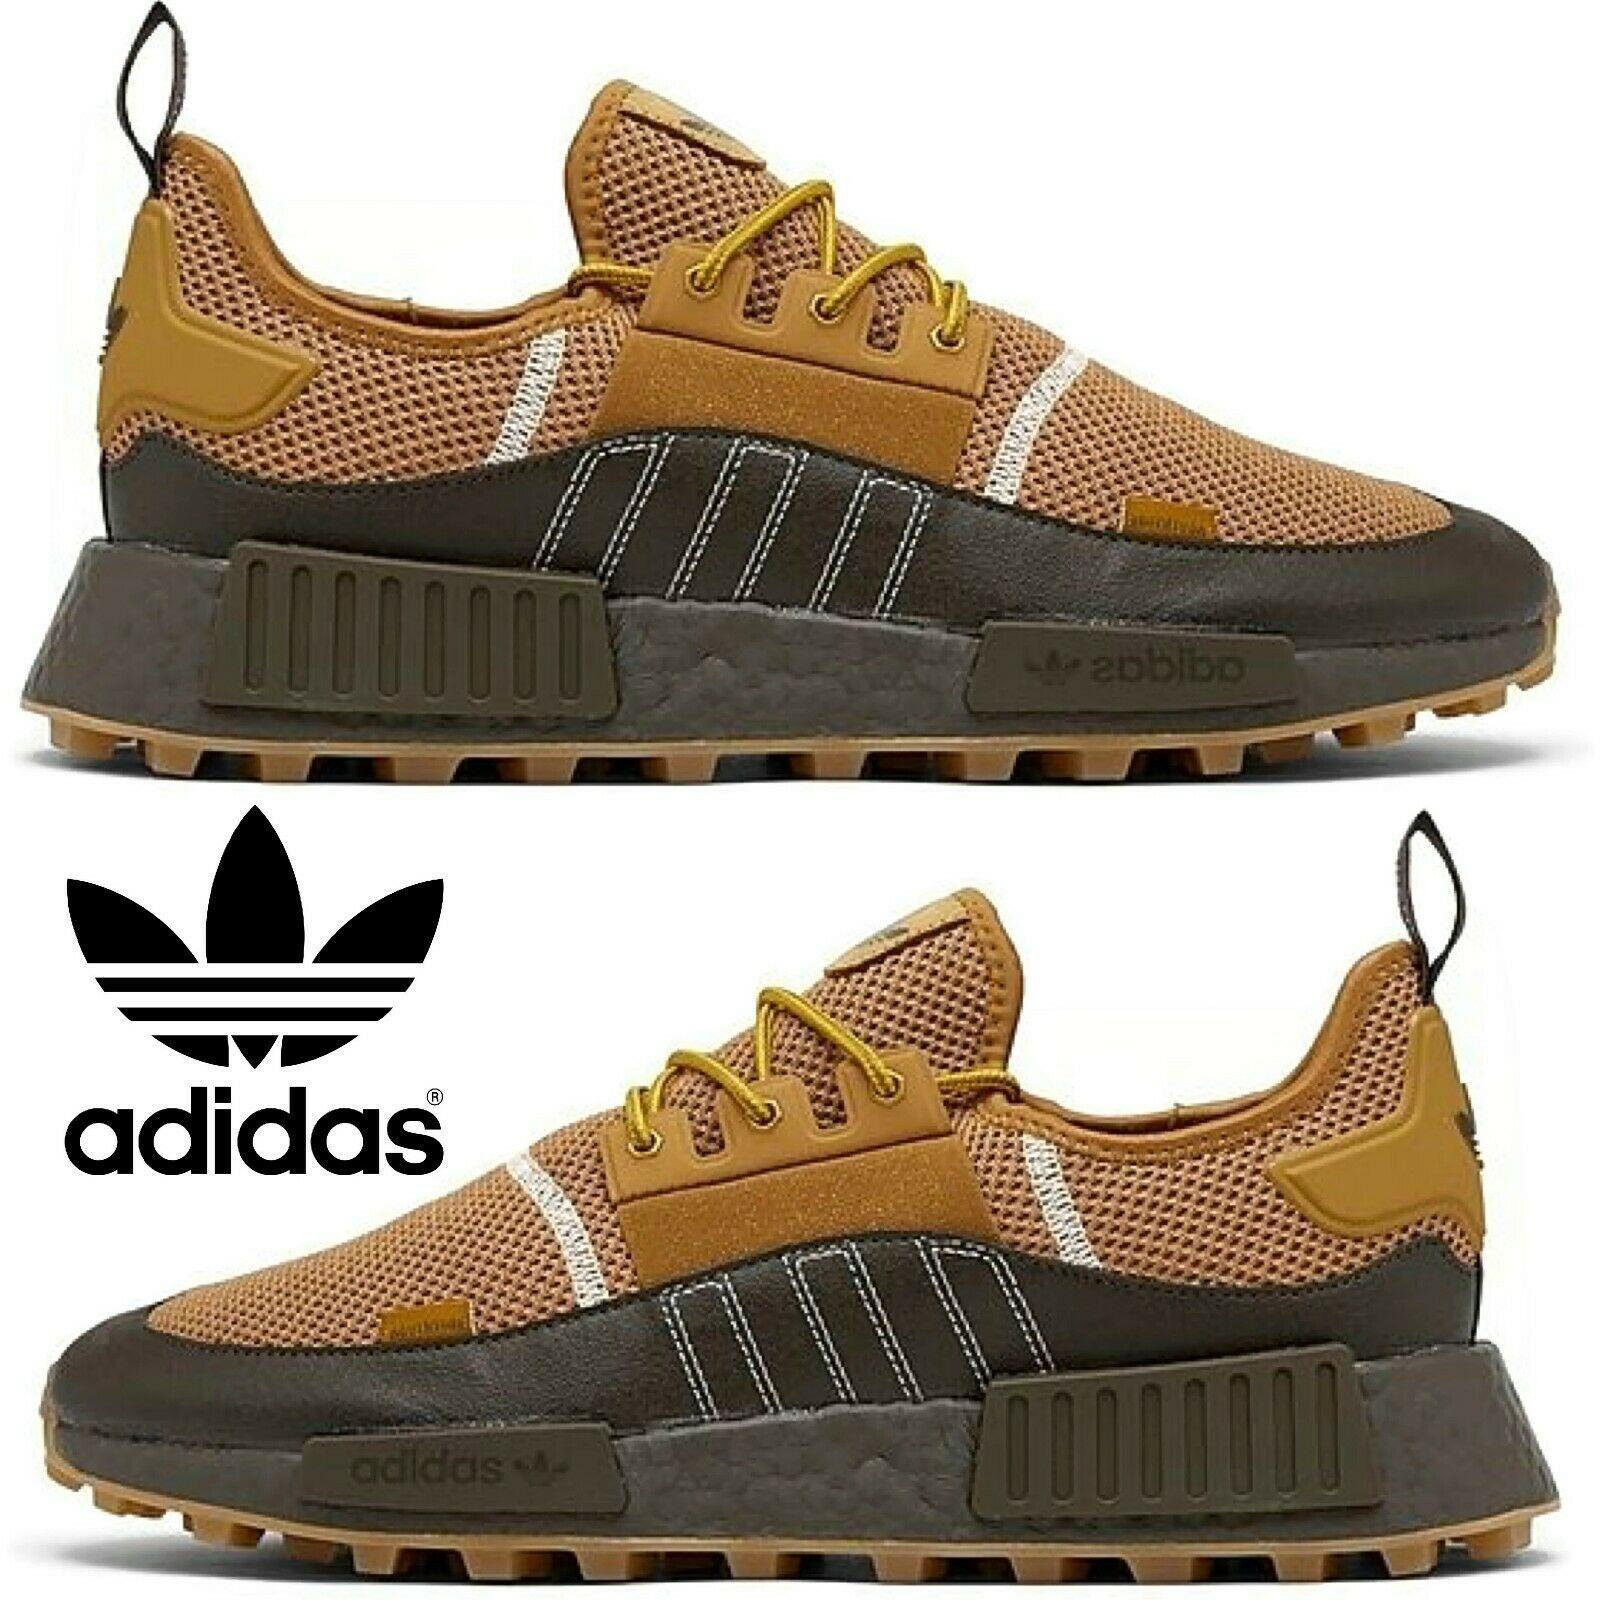 Adidas Originals Nmd R1 Men`s Sneakers Running Shoes Gym Casual Sport Brown